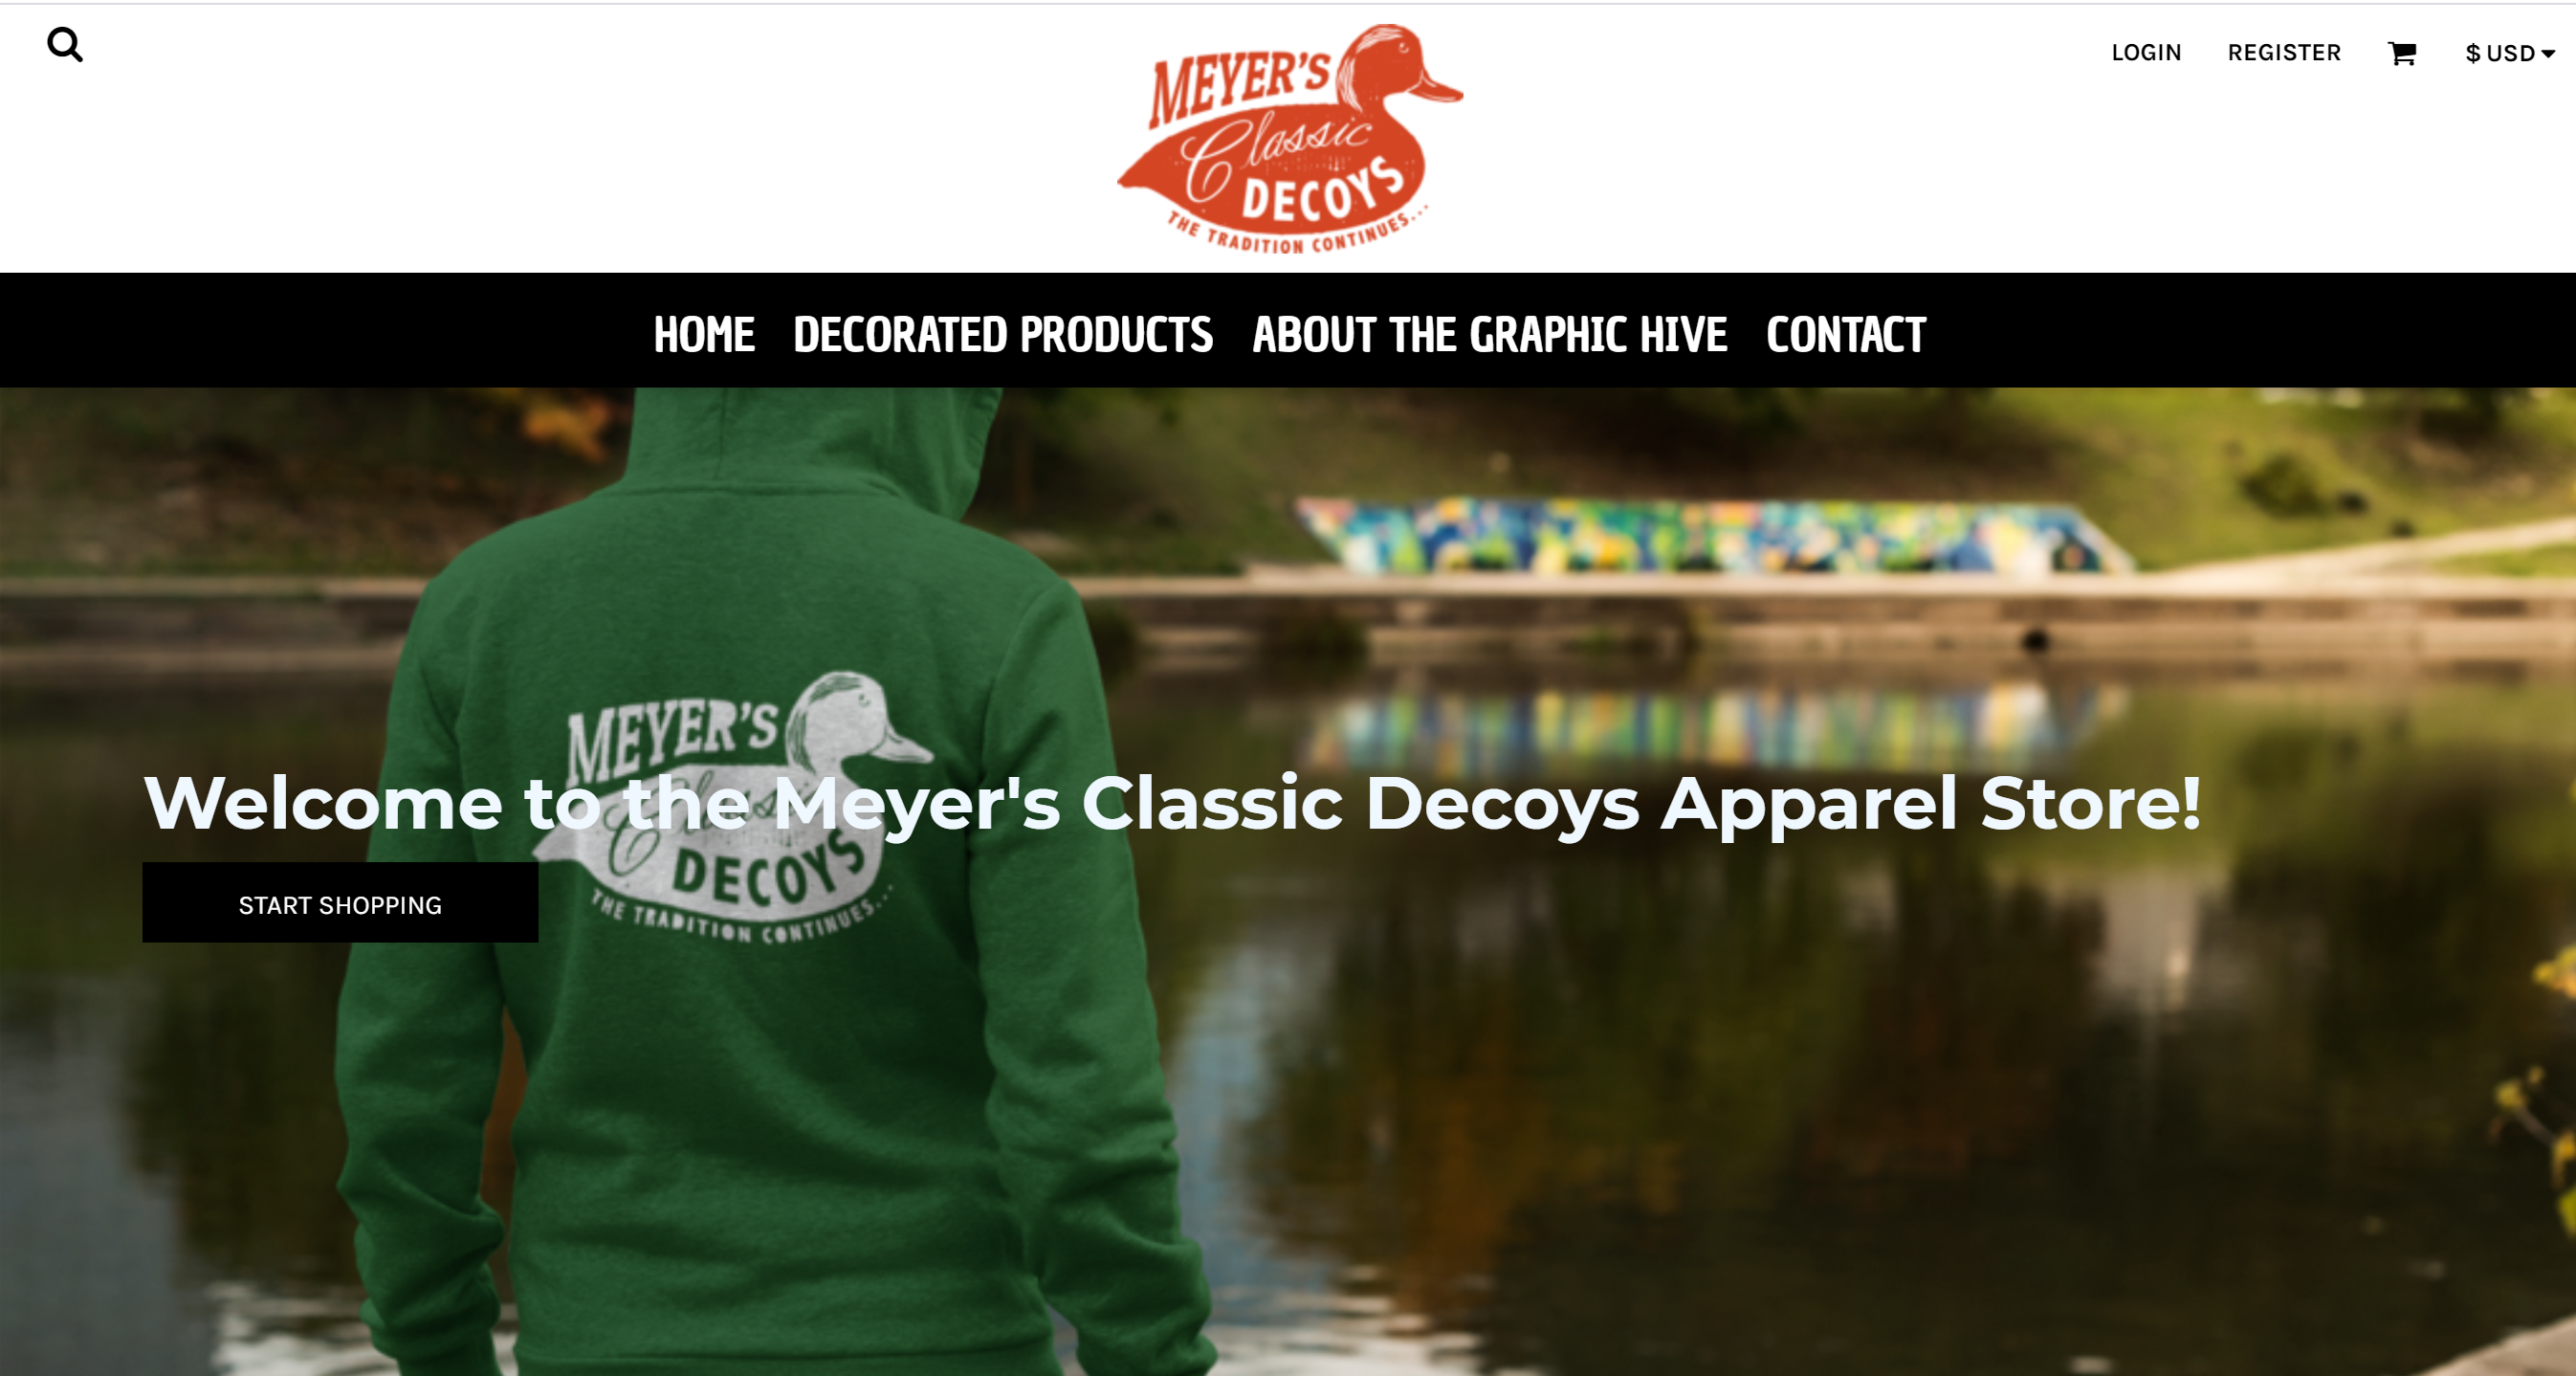 2020-04-16_15_16_04-Home_Meyers_Classic_Decoys_Apparel_Store